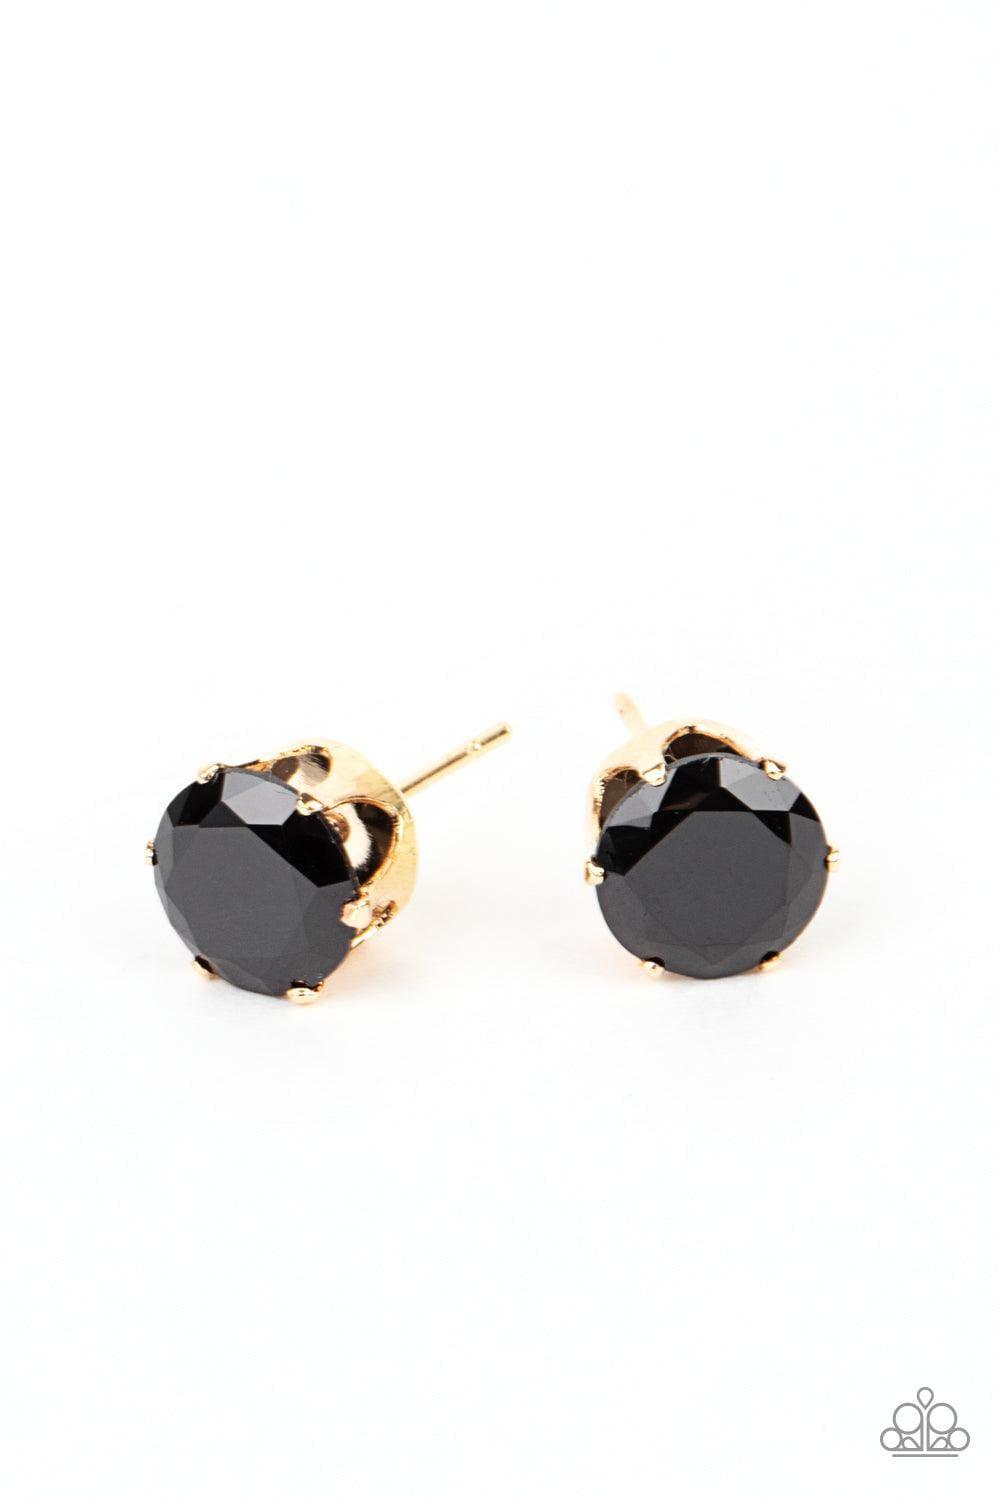 Paparazzi Accessories - Modest Motivation - Gold and Black Post Earrings - Bling by JessieK